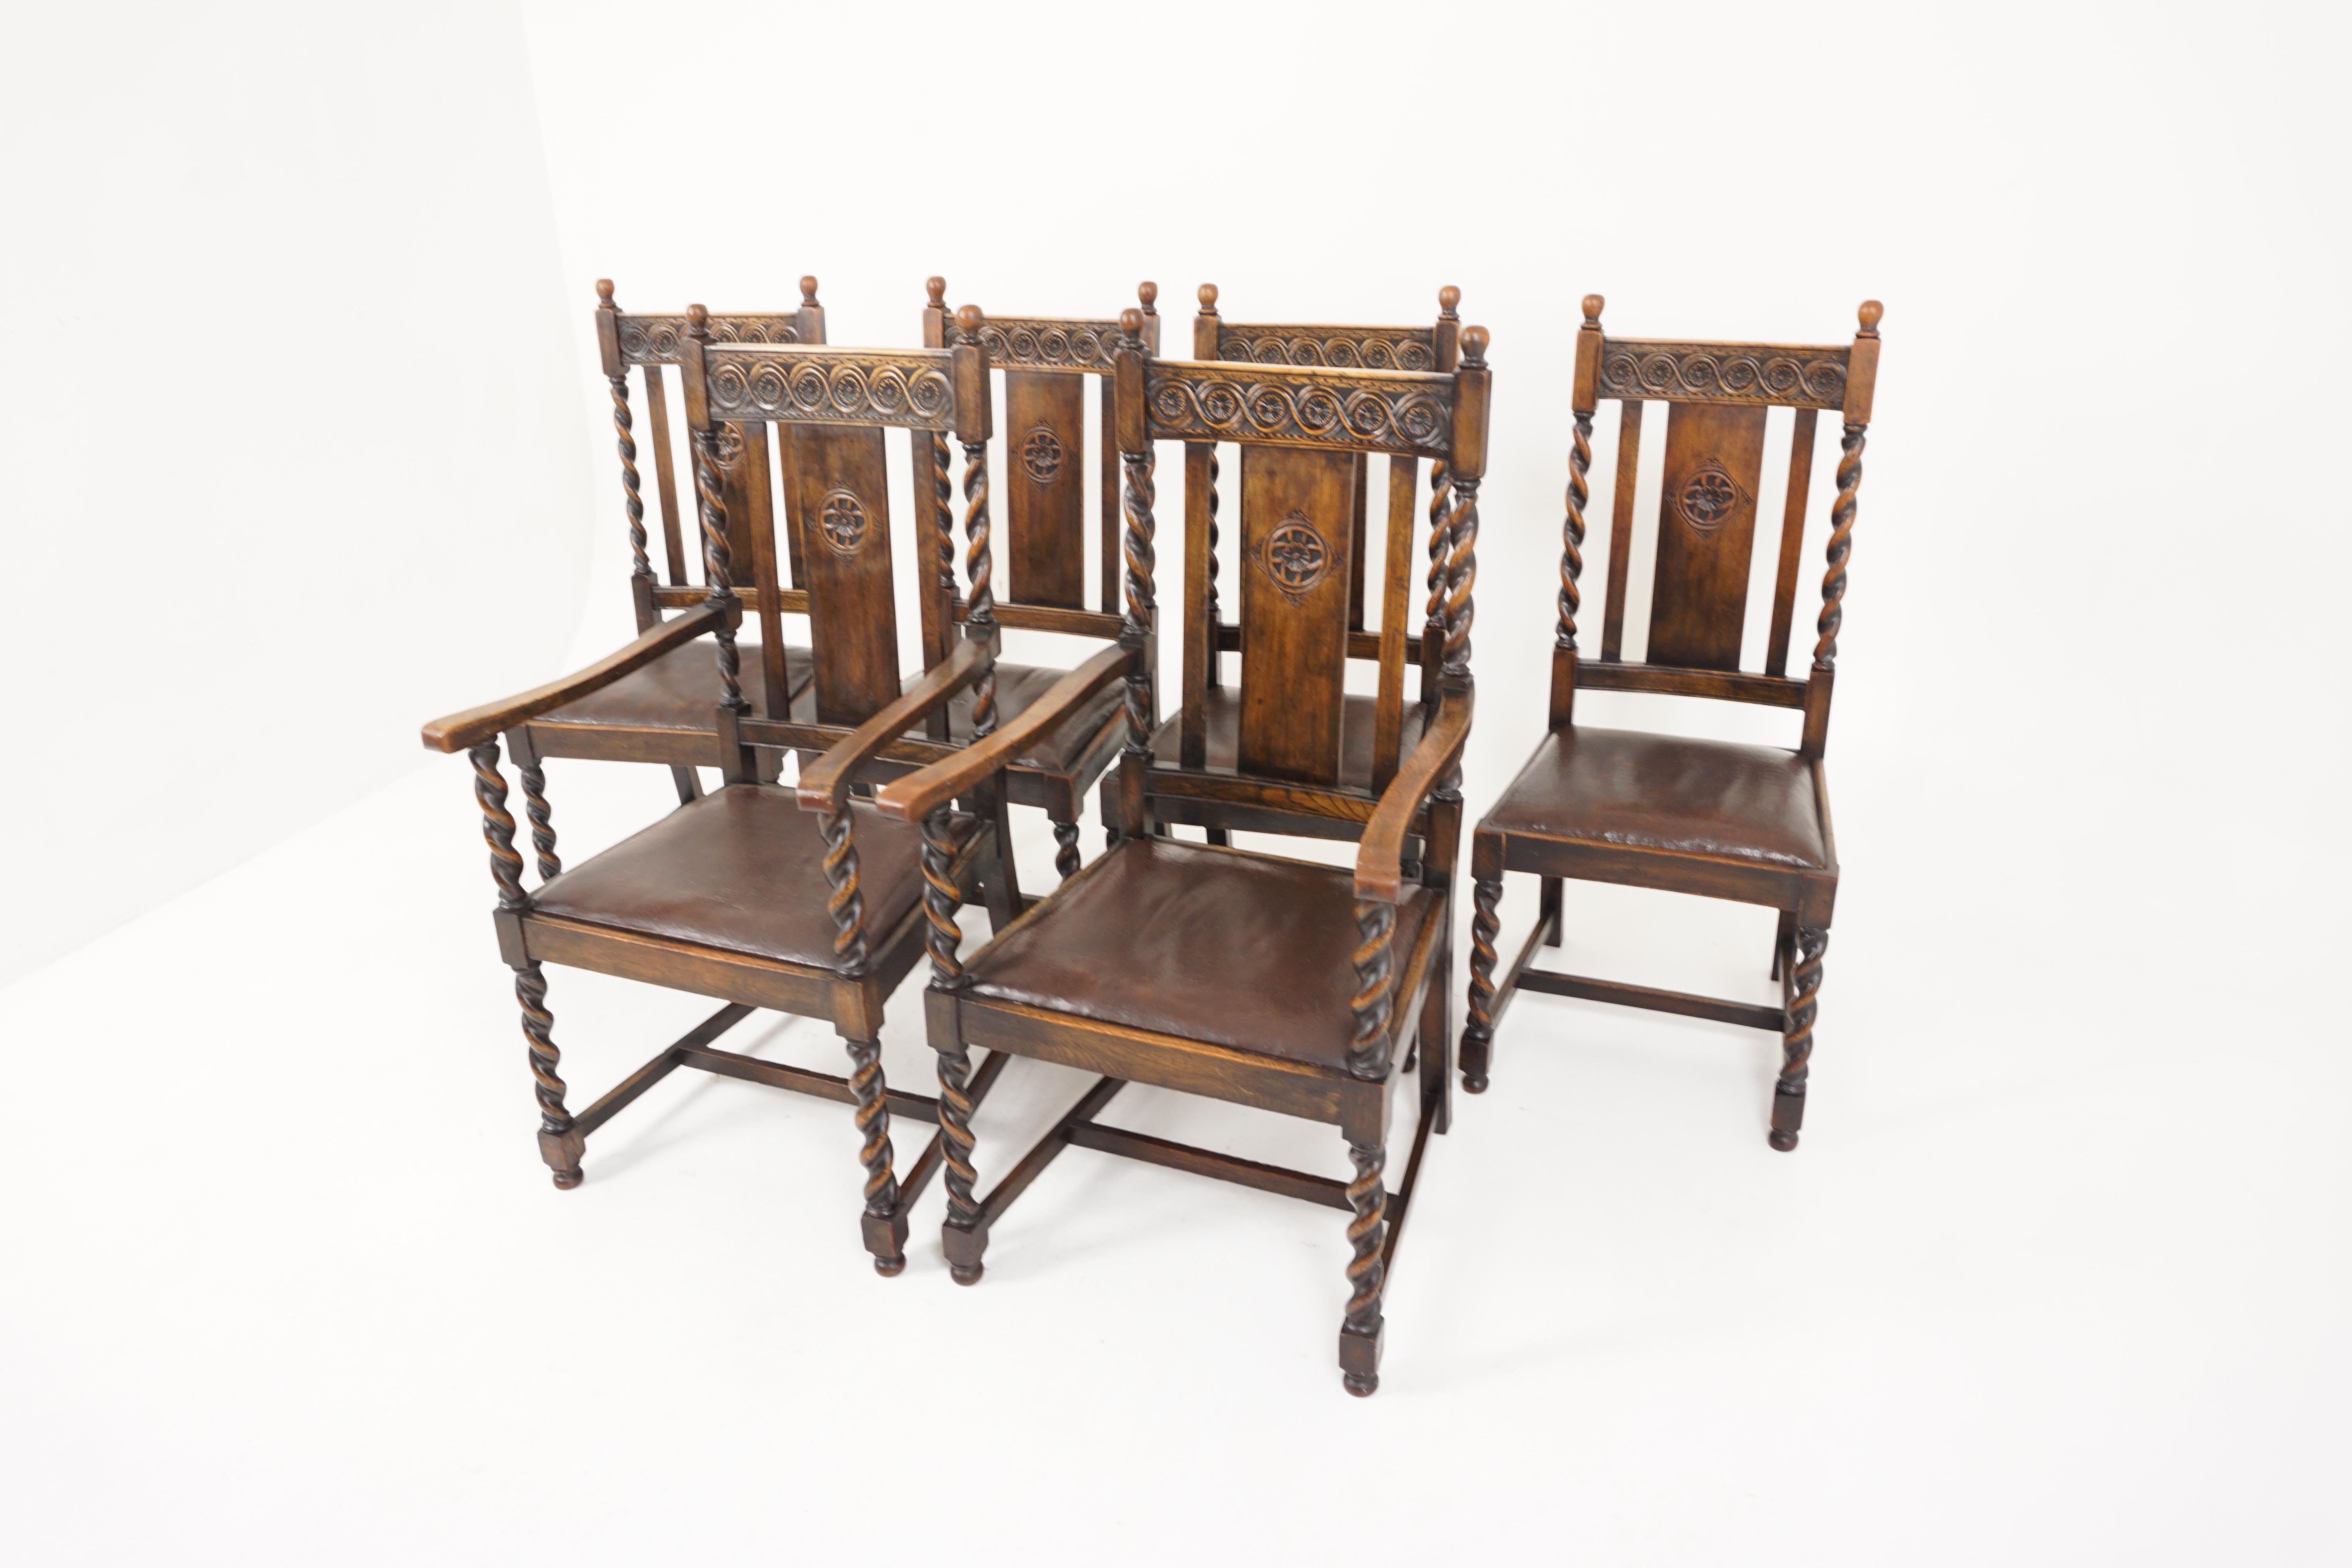 Antique dining chair, set of 6, carved oak, Barley Twist, Scotland 1910, B2646

Scotland 1910
Solid oak
Original finish
Carved top rail 
Barley twist supports with finials on top 
Lift out seat below
All standing on barley twist